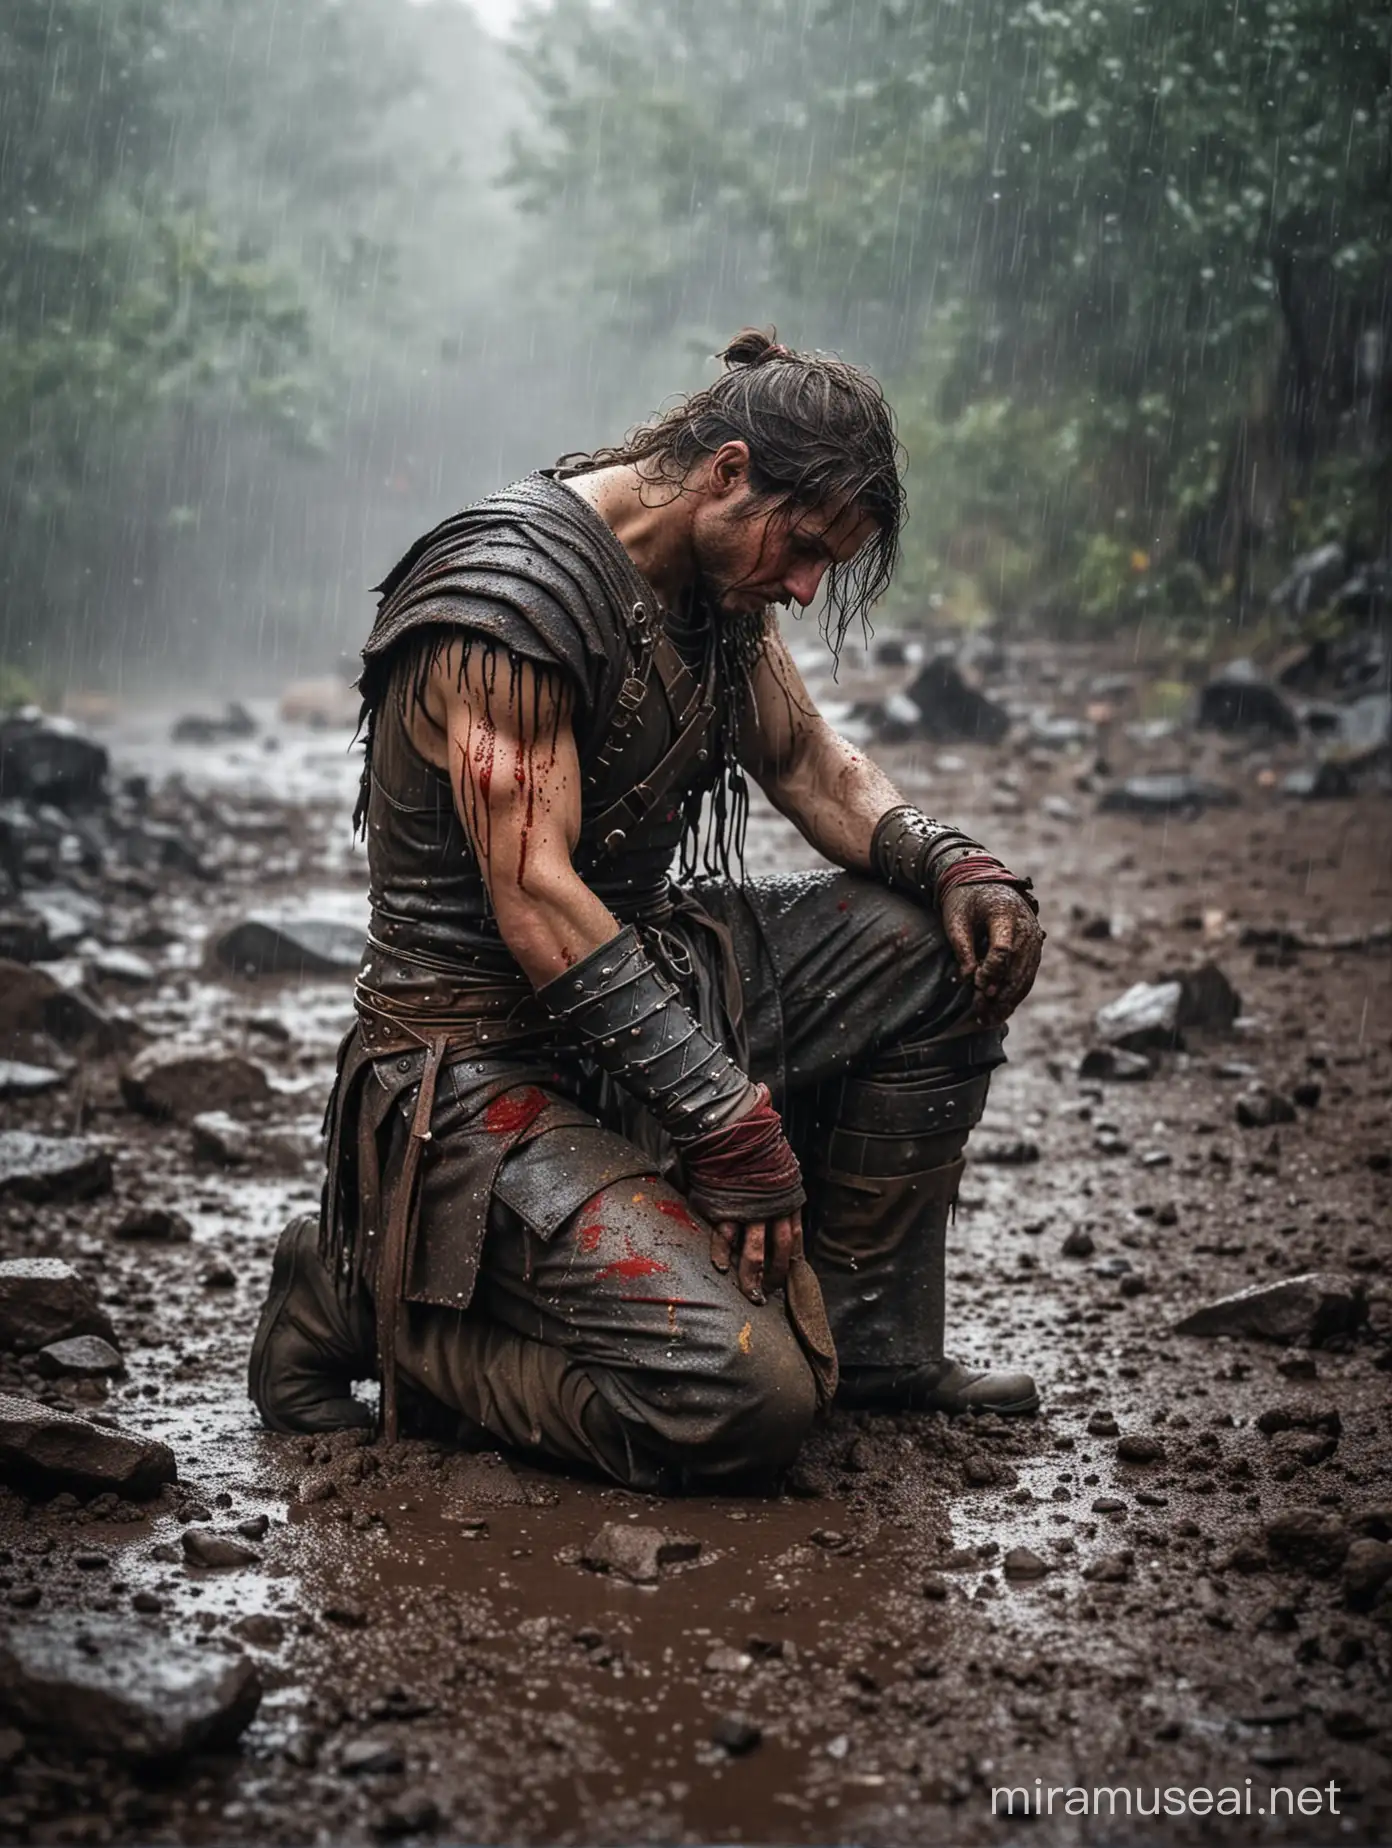 Exhausted warrior covered in dirt and blood kneeling on rocky ground and crying in pouring rain (side profile)